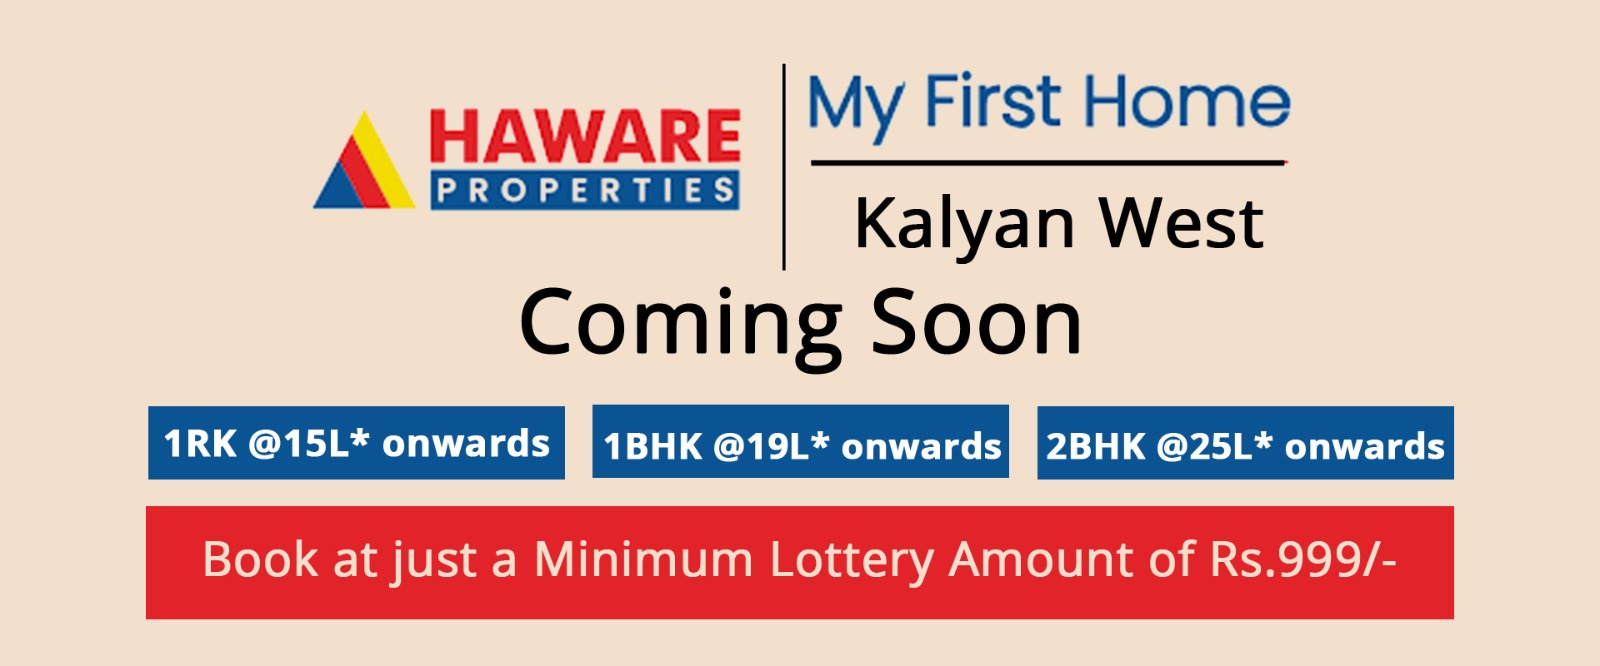 Haware My First Home | Properties in Kalyan West